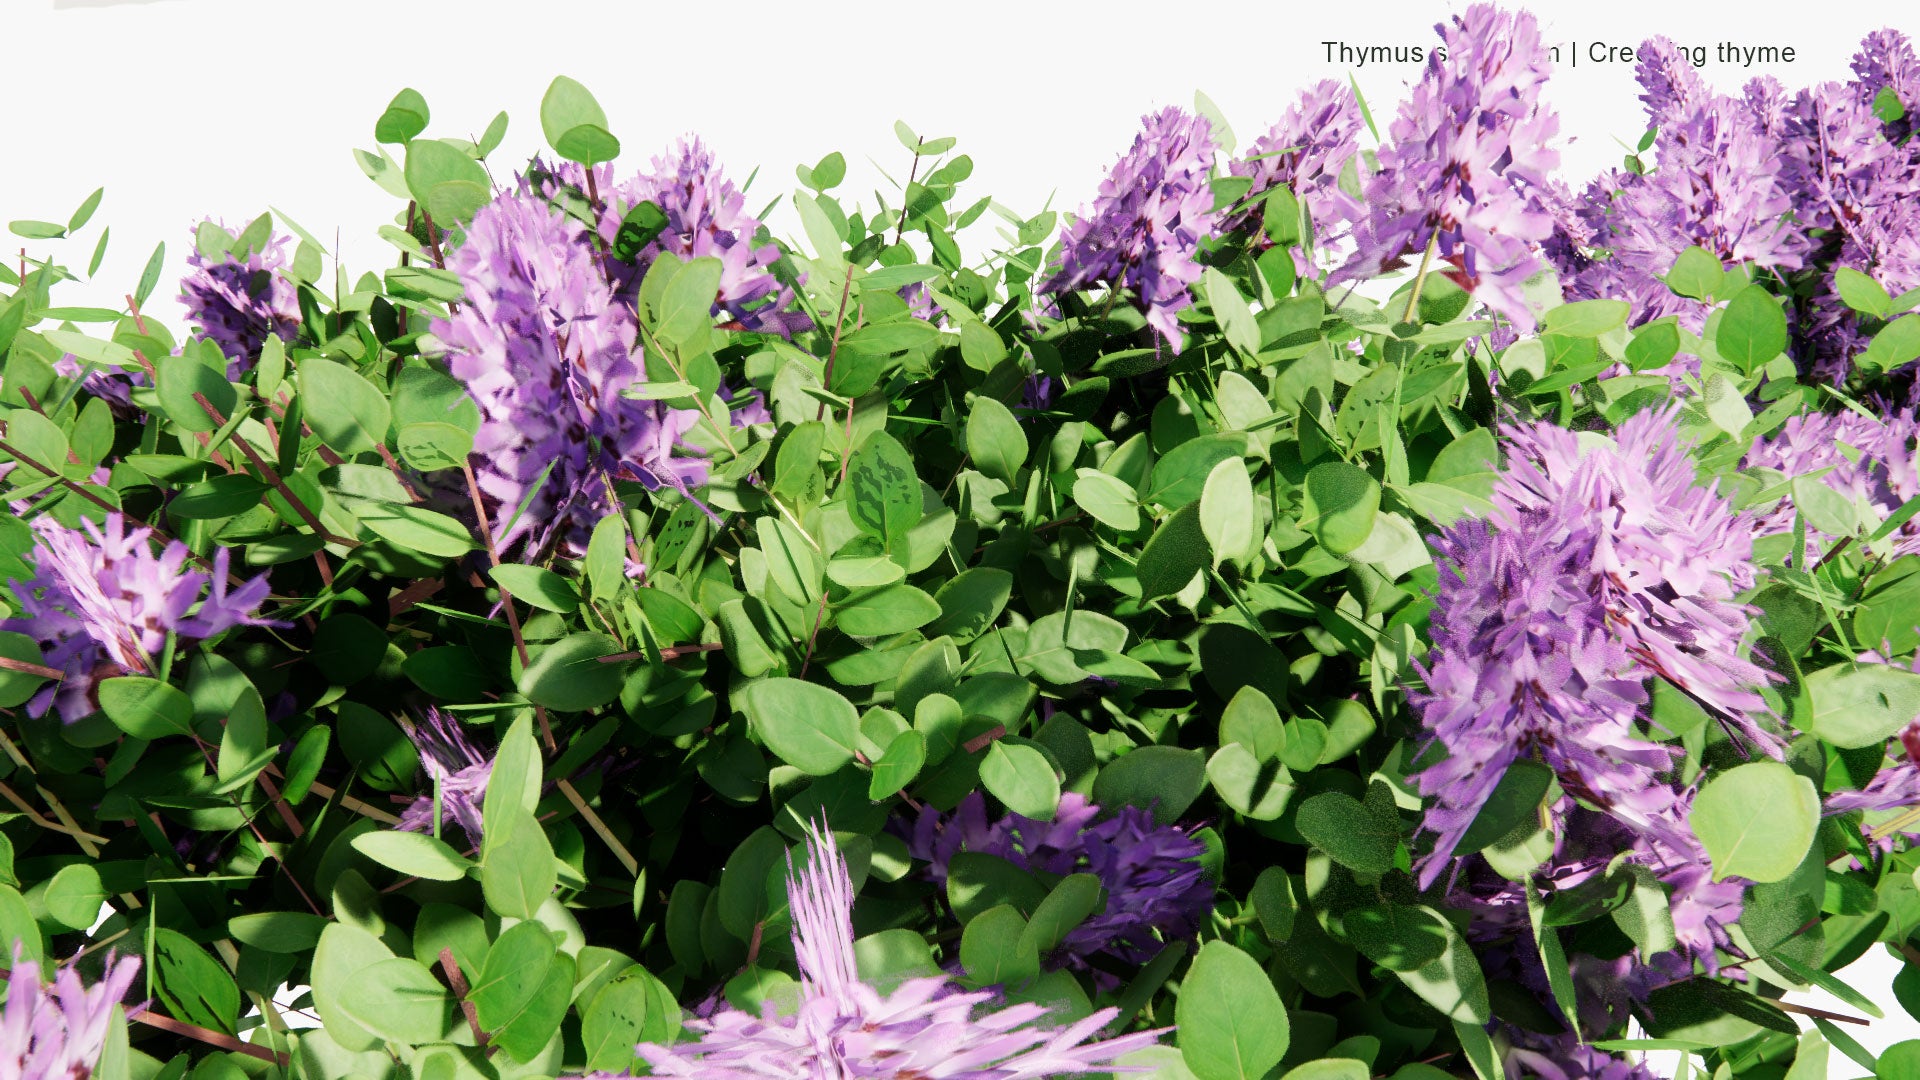 Low Poly Thymus Serpyllum - Breckland Thyme, Breckland Wild Thyme, Wild Thyme, Creeping Thyme, Elfin Thyme (3D Model)